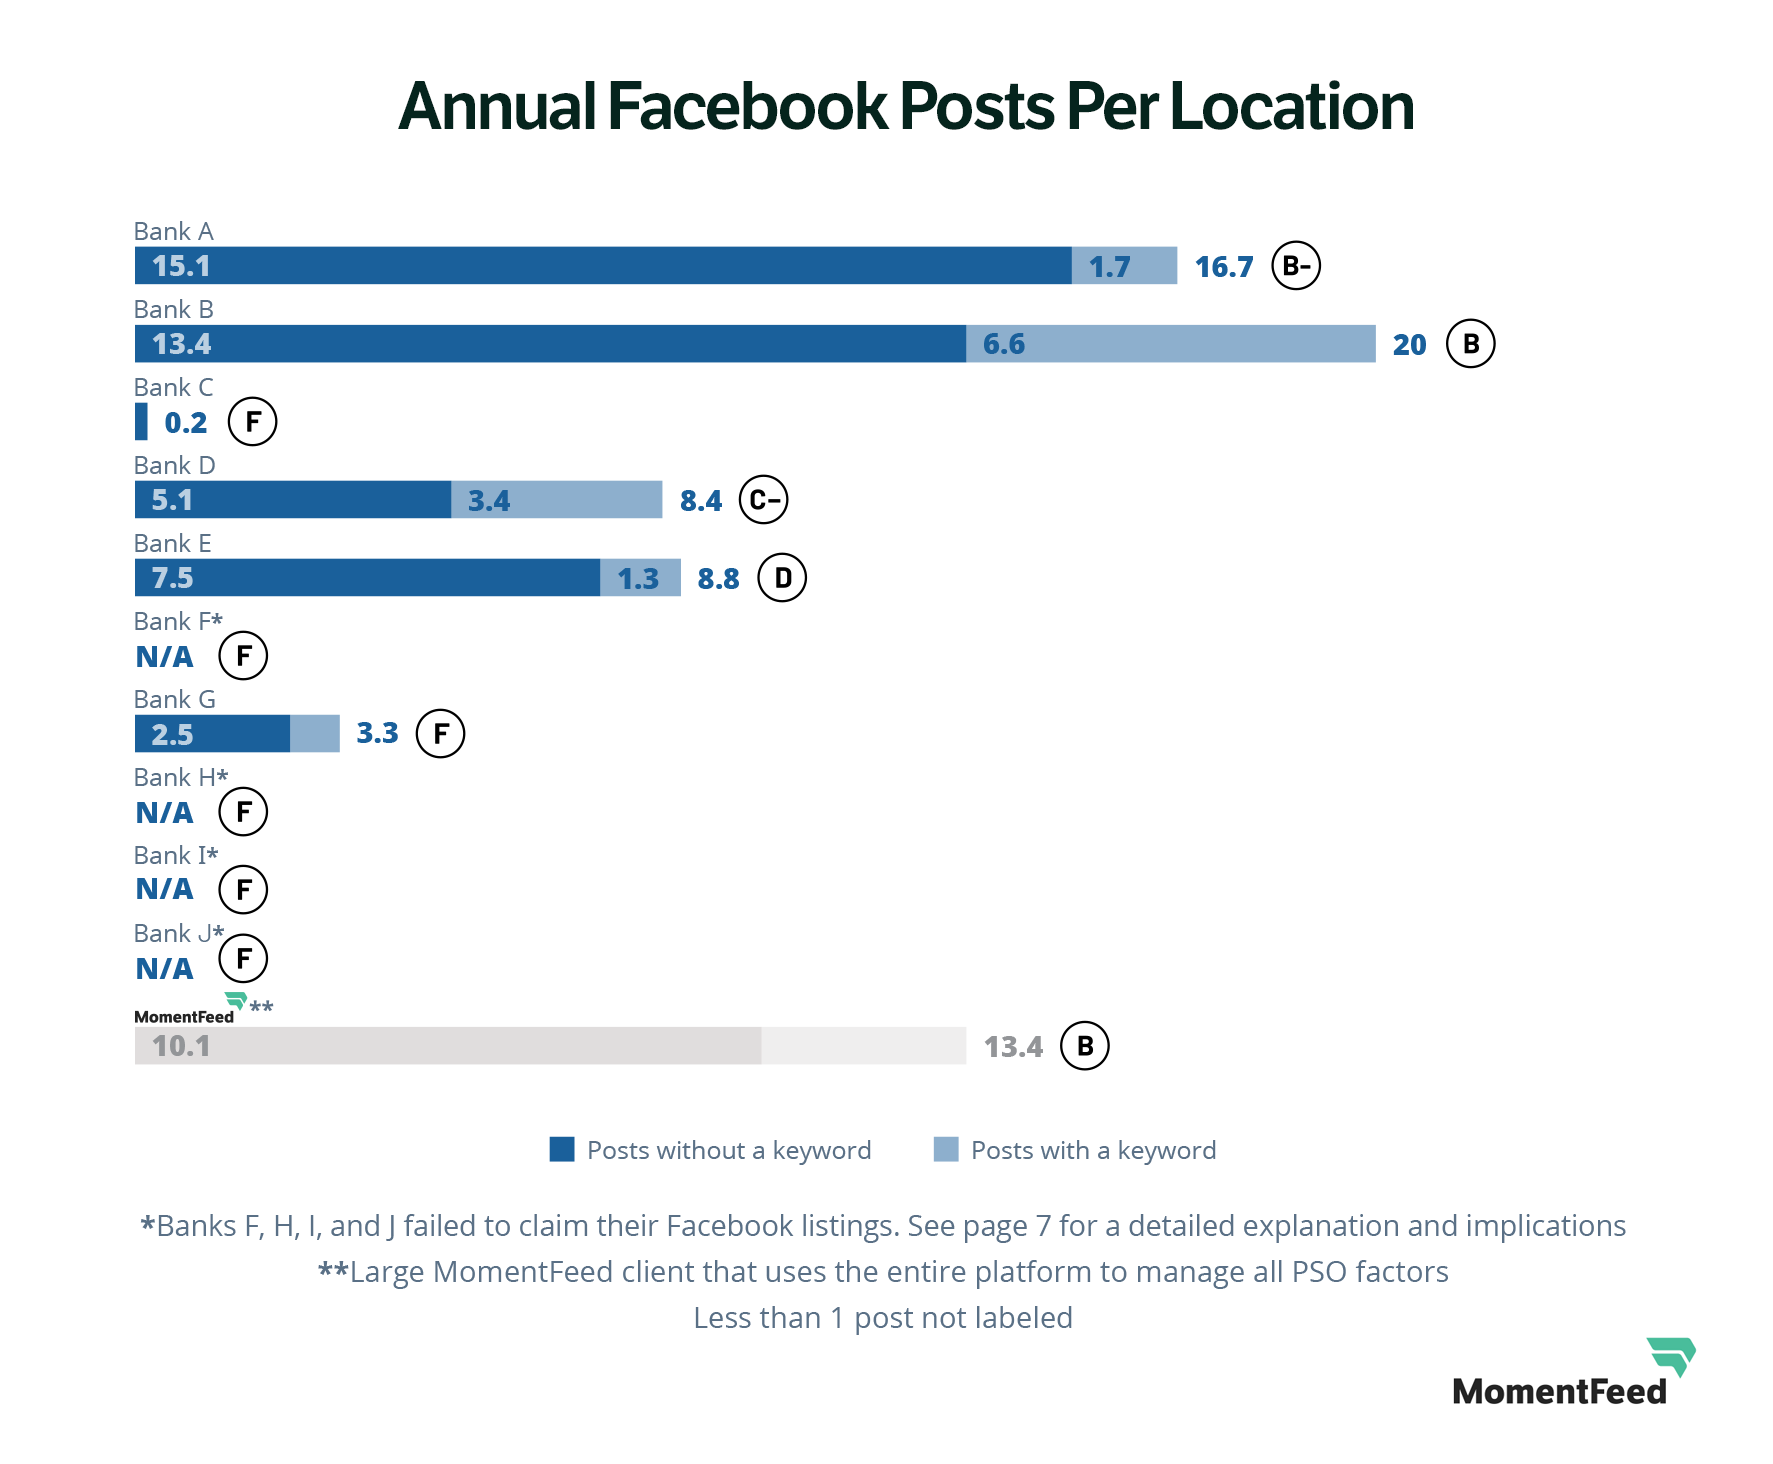 Most banks hit the recommended levels of ~9-10 posts per month but failed to optimize those posts with keywords.